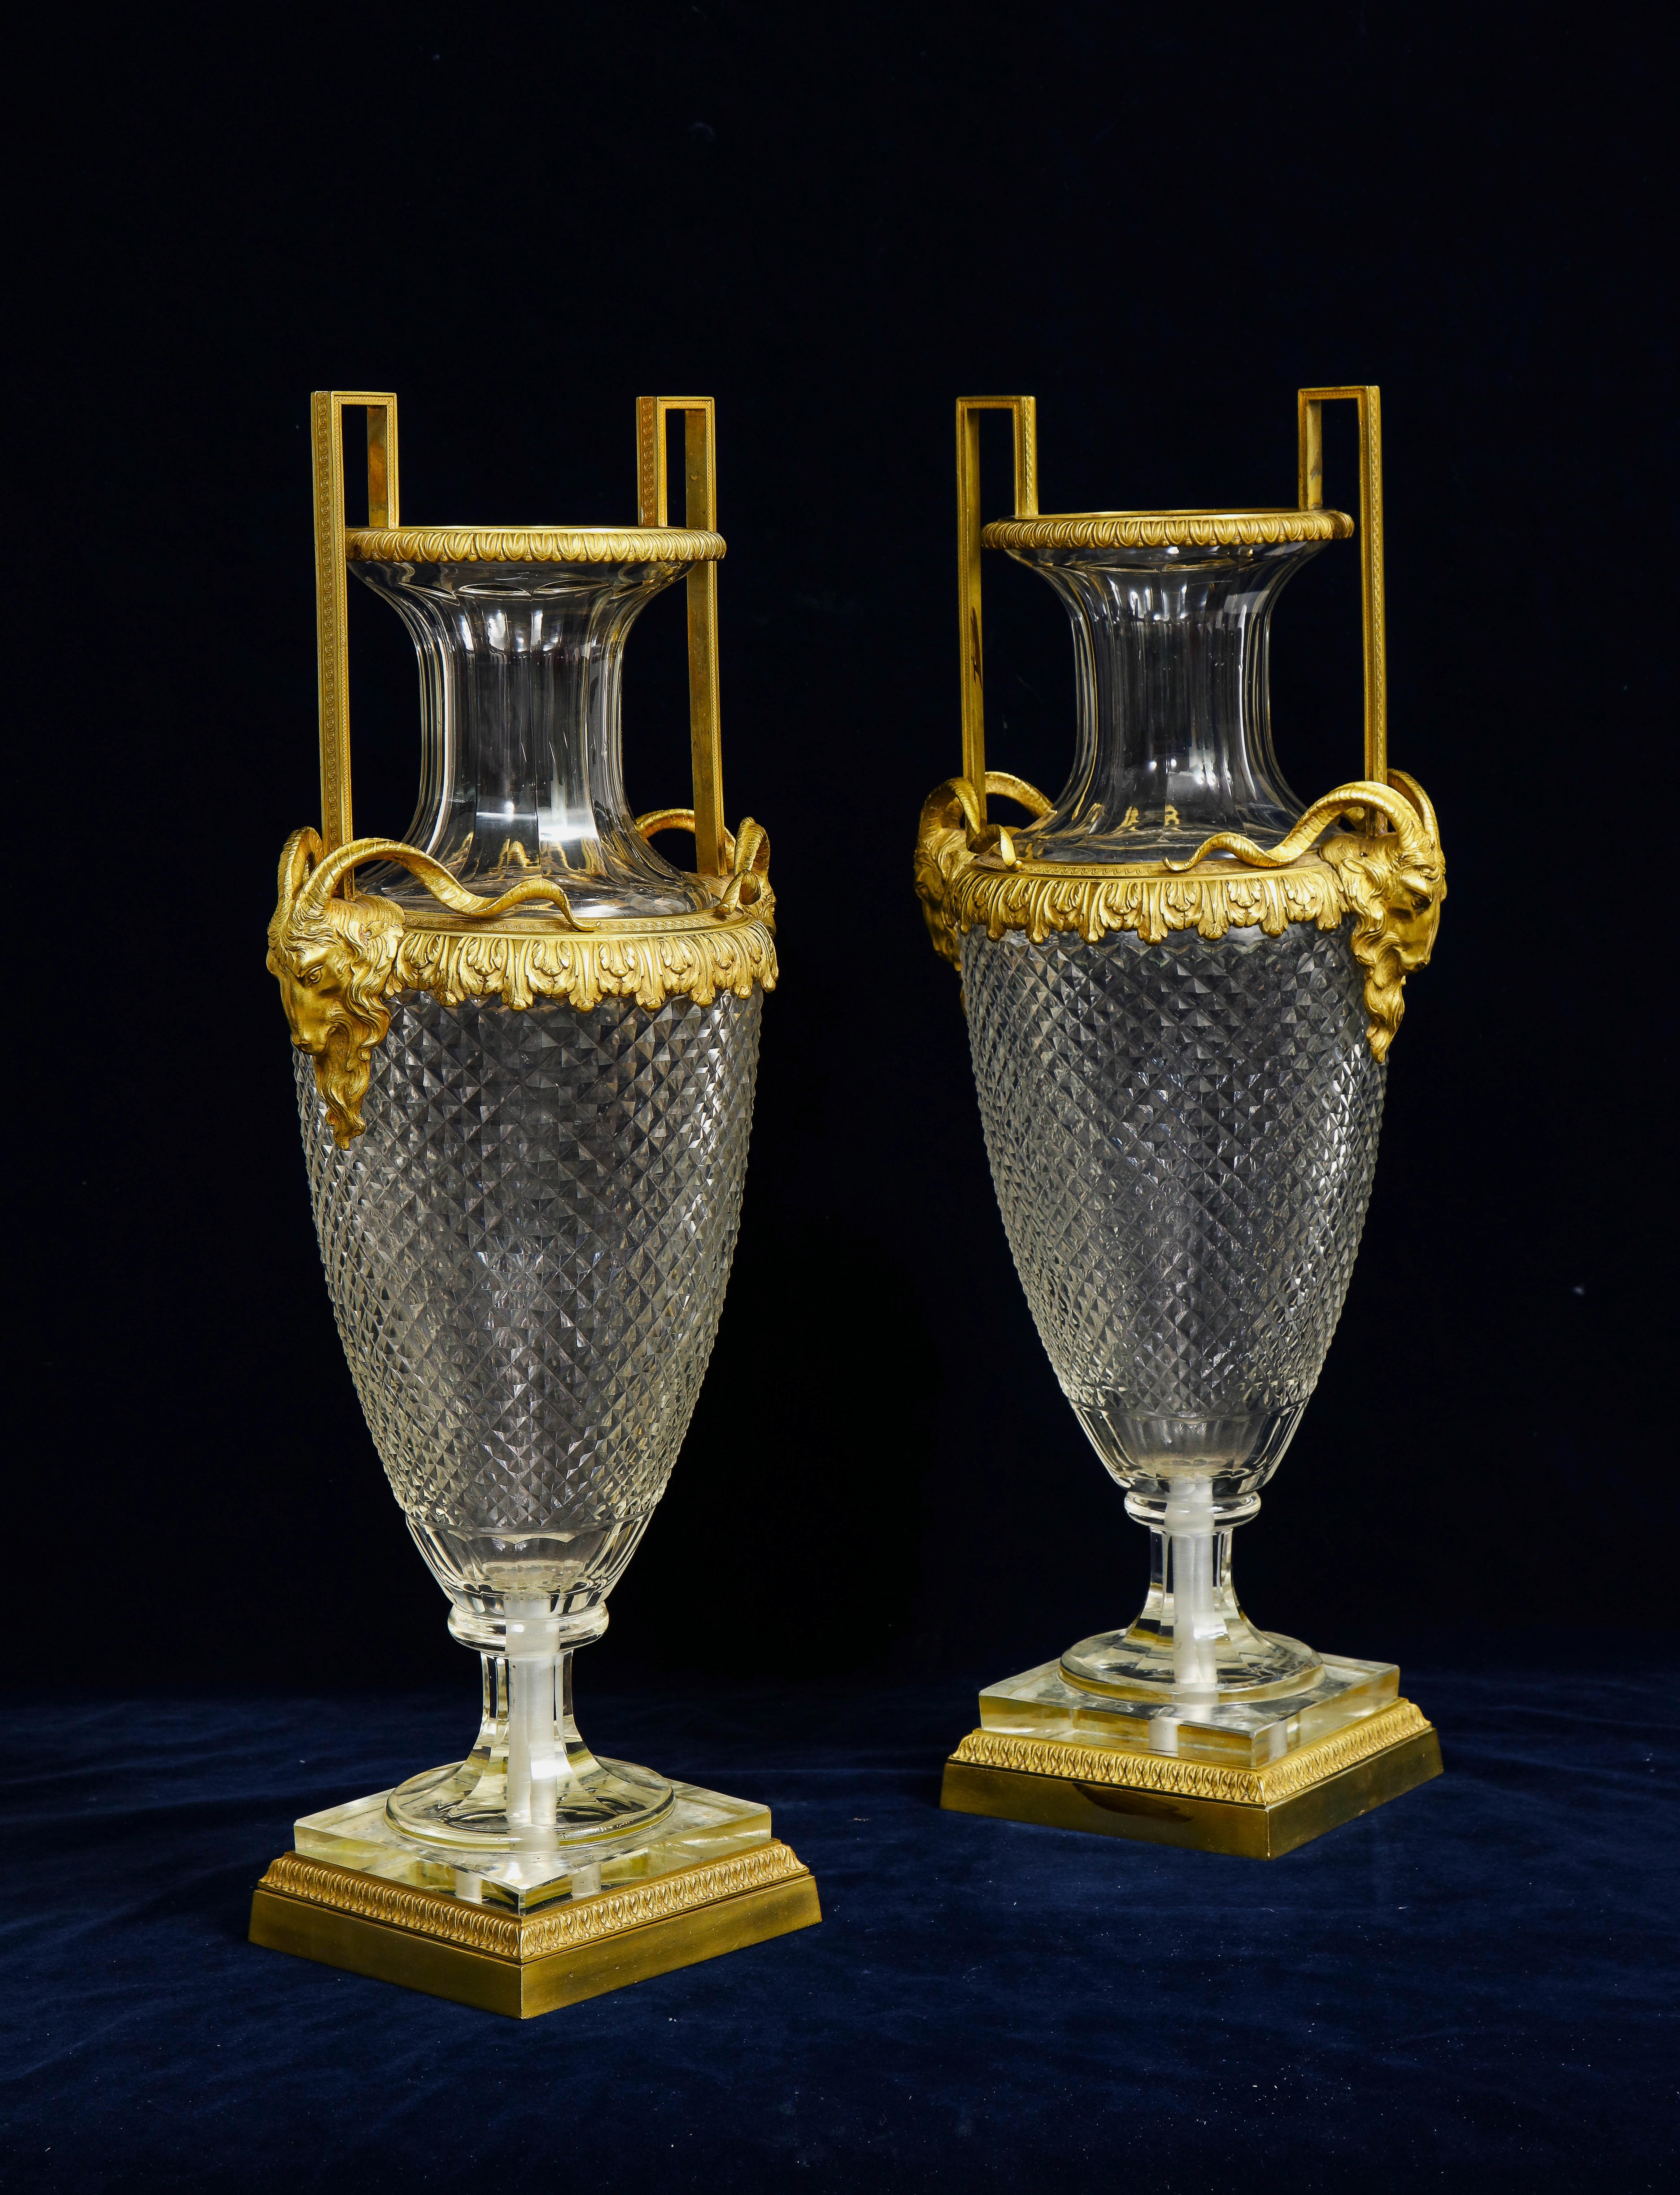 Gilt Pair of 19th Century French Dore Bronze Mounted Crystal Vases Attb to Baccarat For Sale